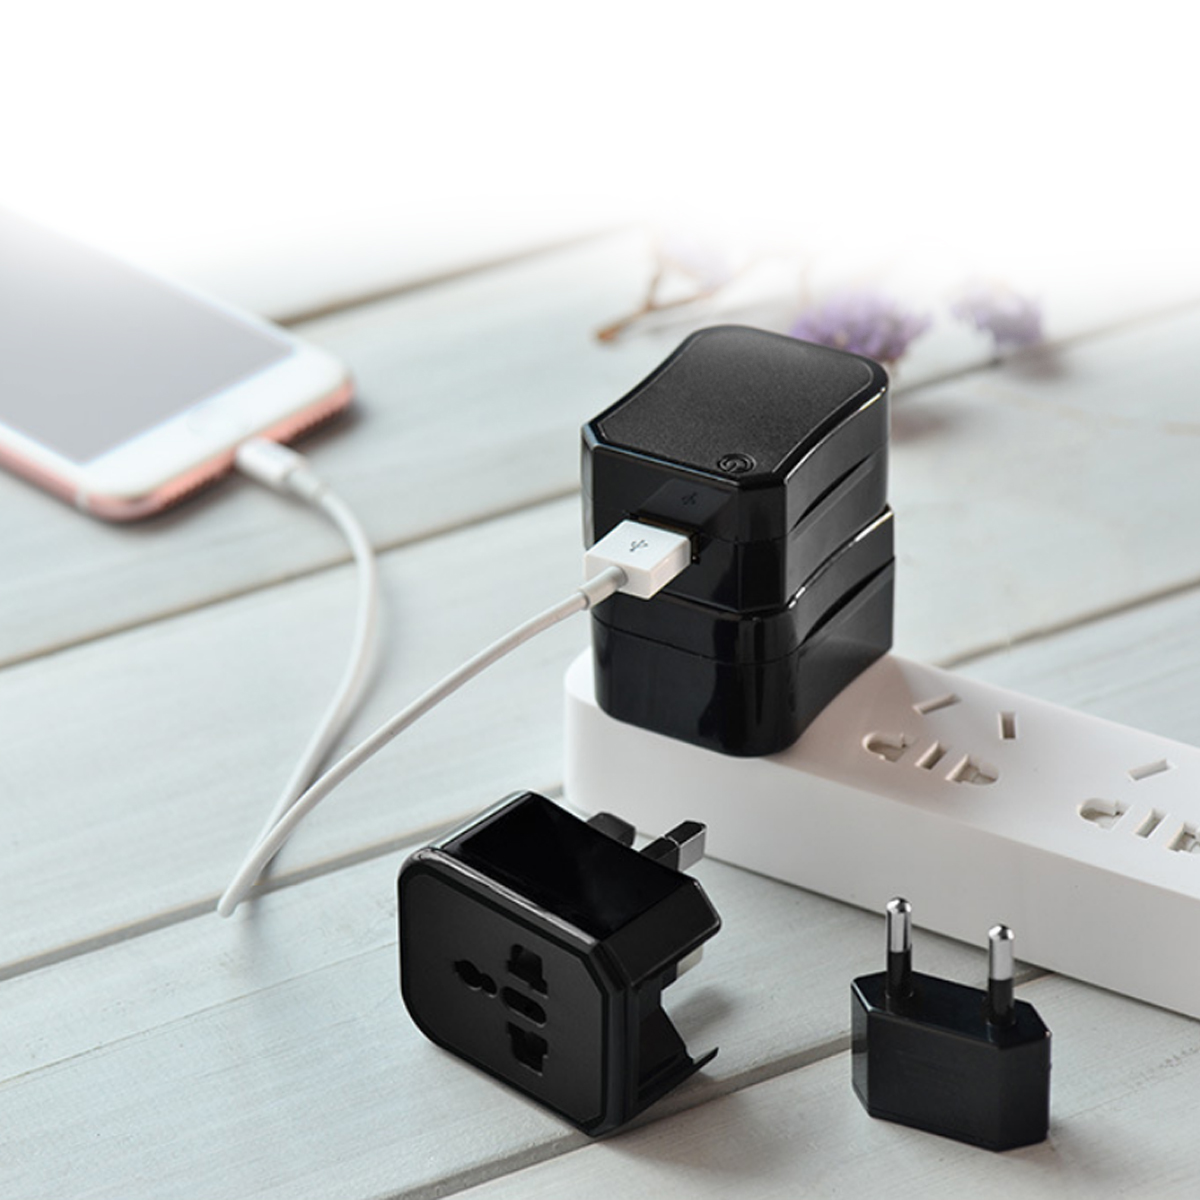 Travel-Adapter-Universal-Power-Adapter-with-2-USB-Ports-Wall-Charger-AC-Power-Plug-1304296-1